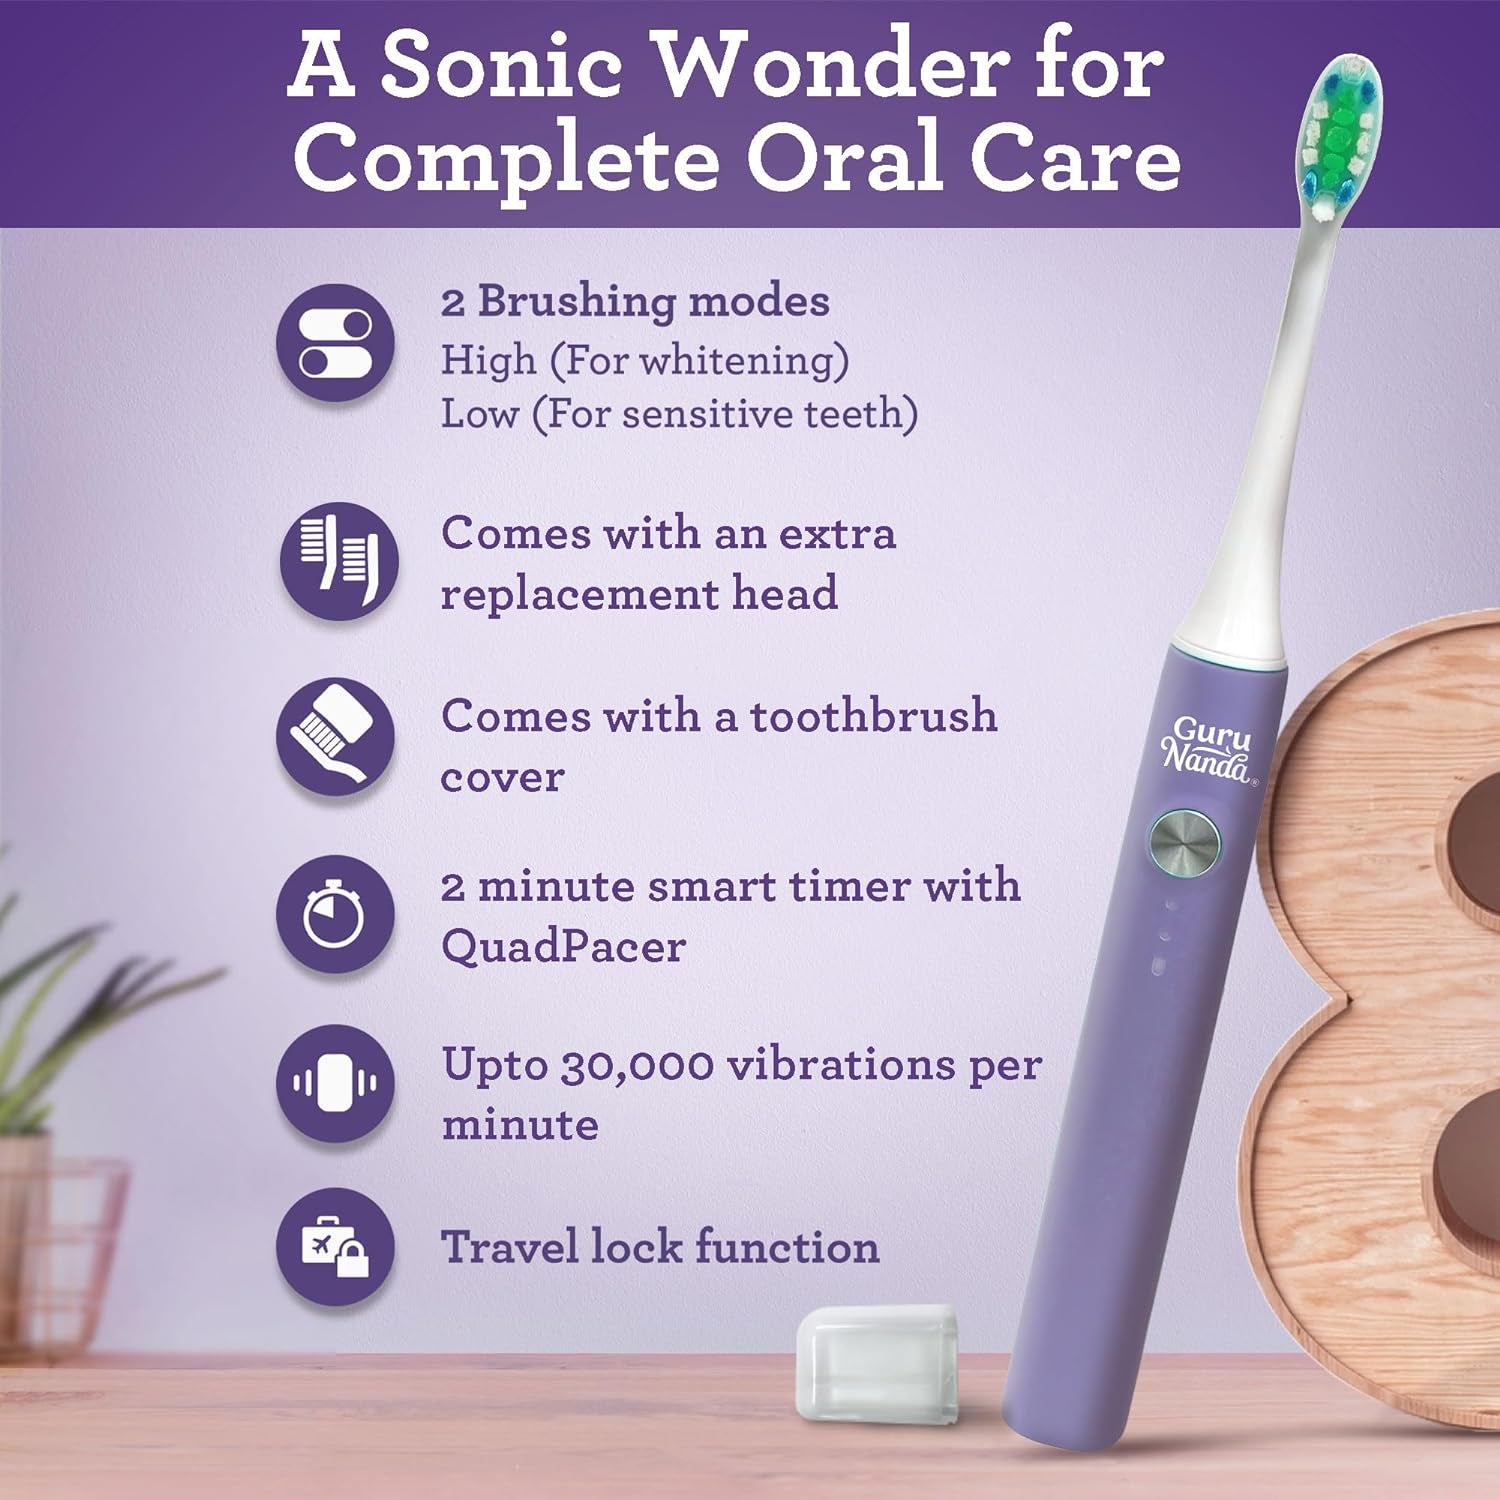 Total Oral Care, with Mickey D Oil Pulling, Whitening Strips, Concentrated Mouthwash, Advanced Water Flosser & Lavender Sonic Toothbrush